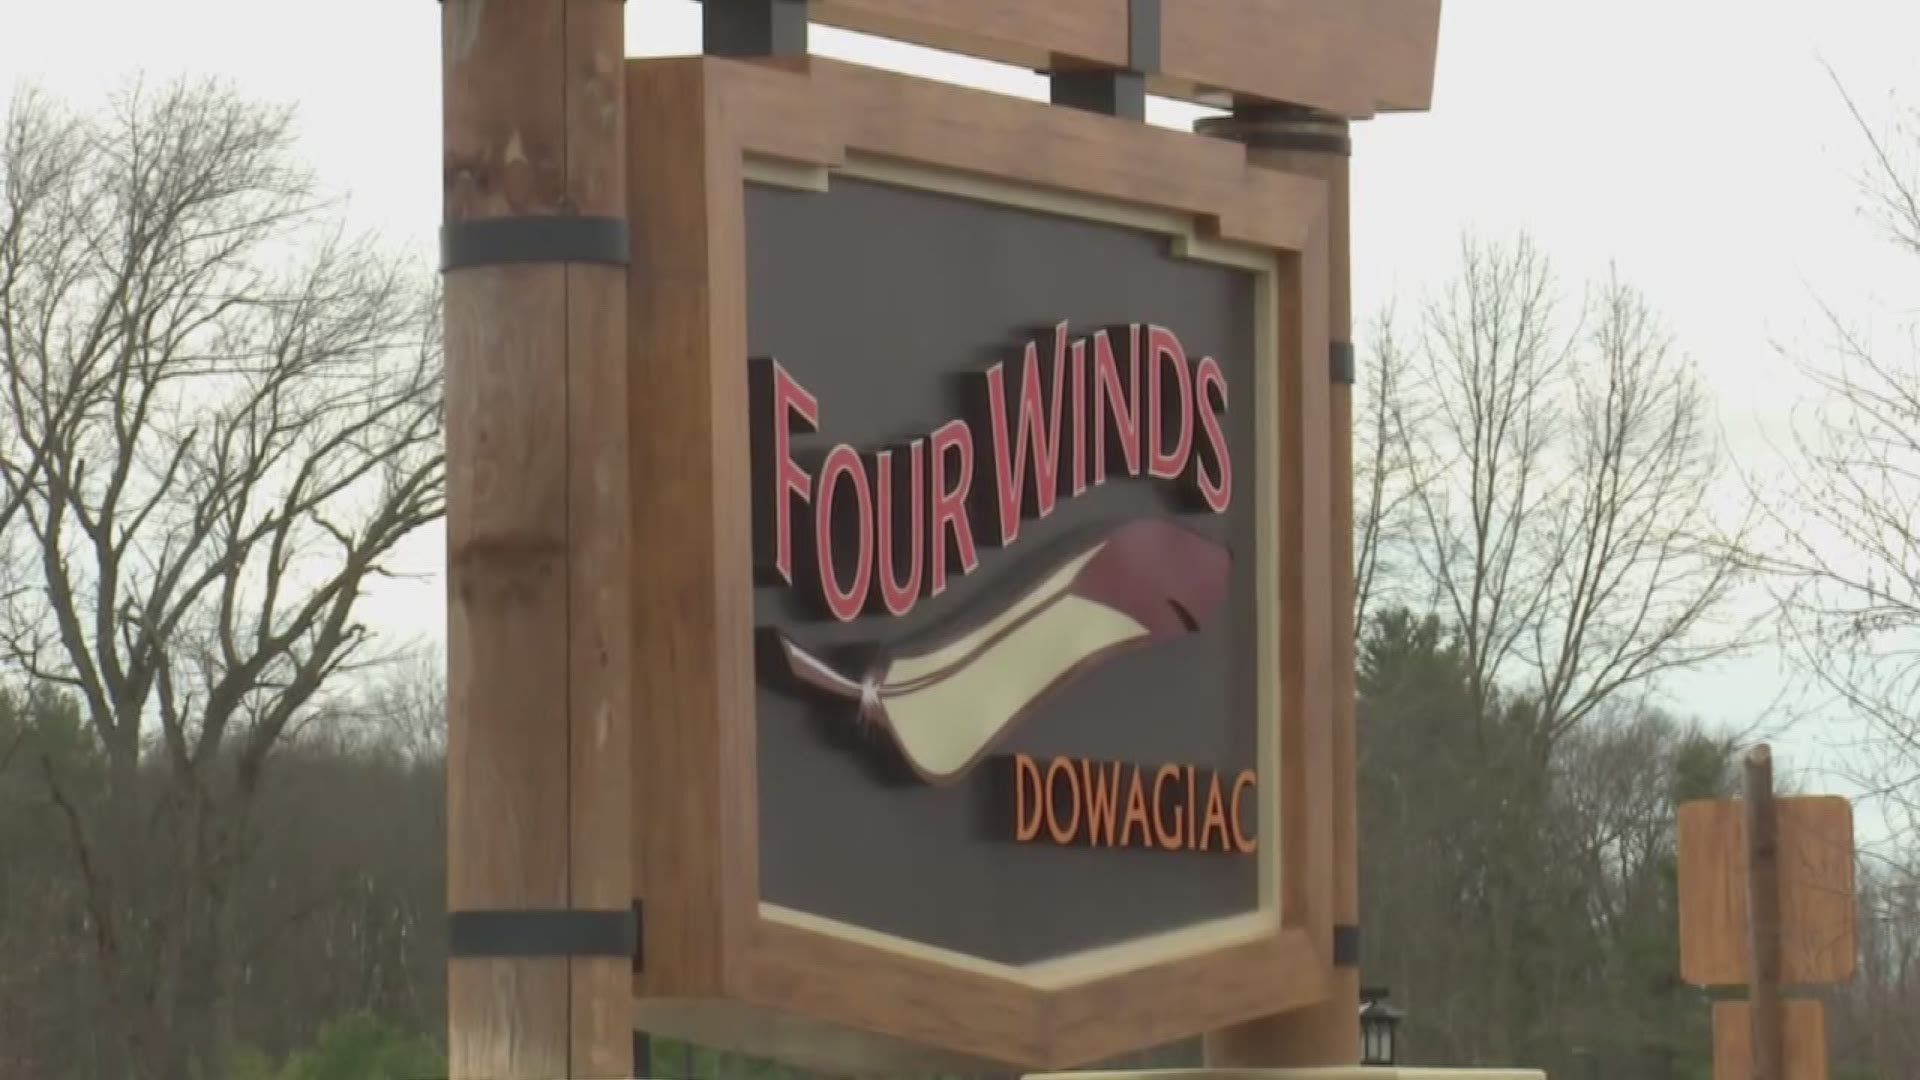 We have an update on the story of the two dogs found dead in a casino parking lot.

They were left inside a car in the parking lot of the Four Winds Casino in Dowagiac.

A woman who found the dogs in distress tried to get help, but the animals still died.